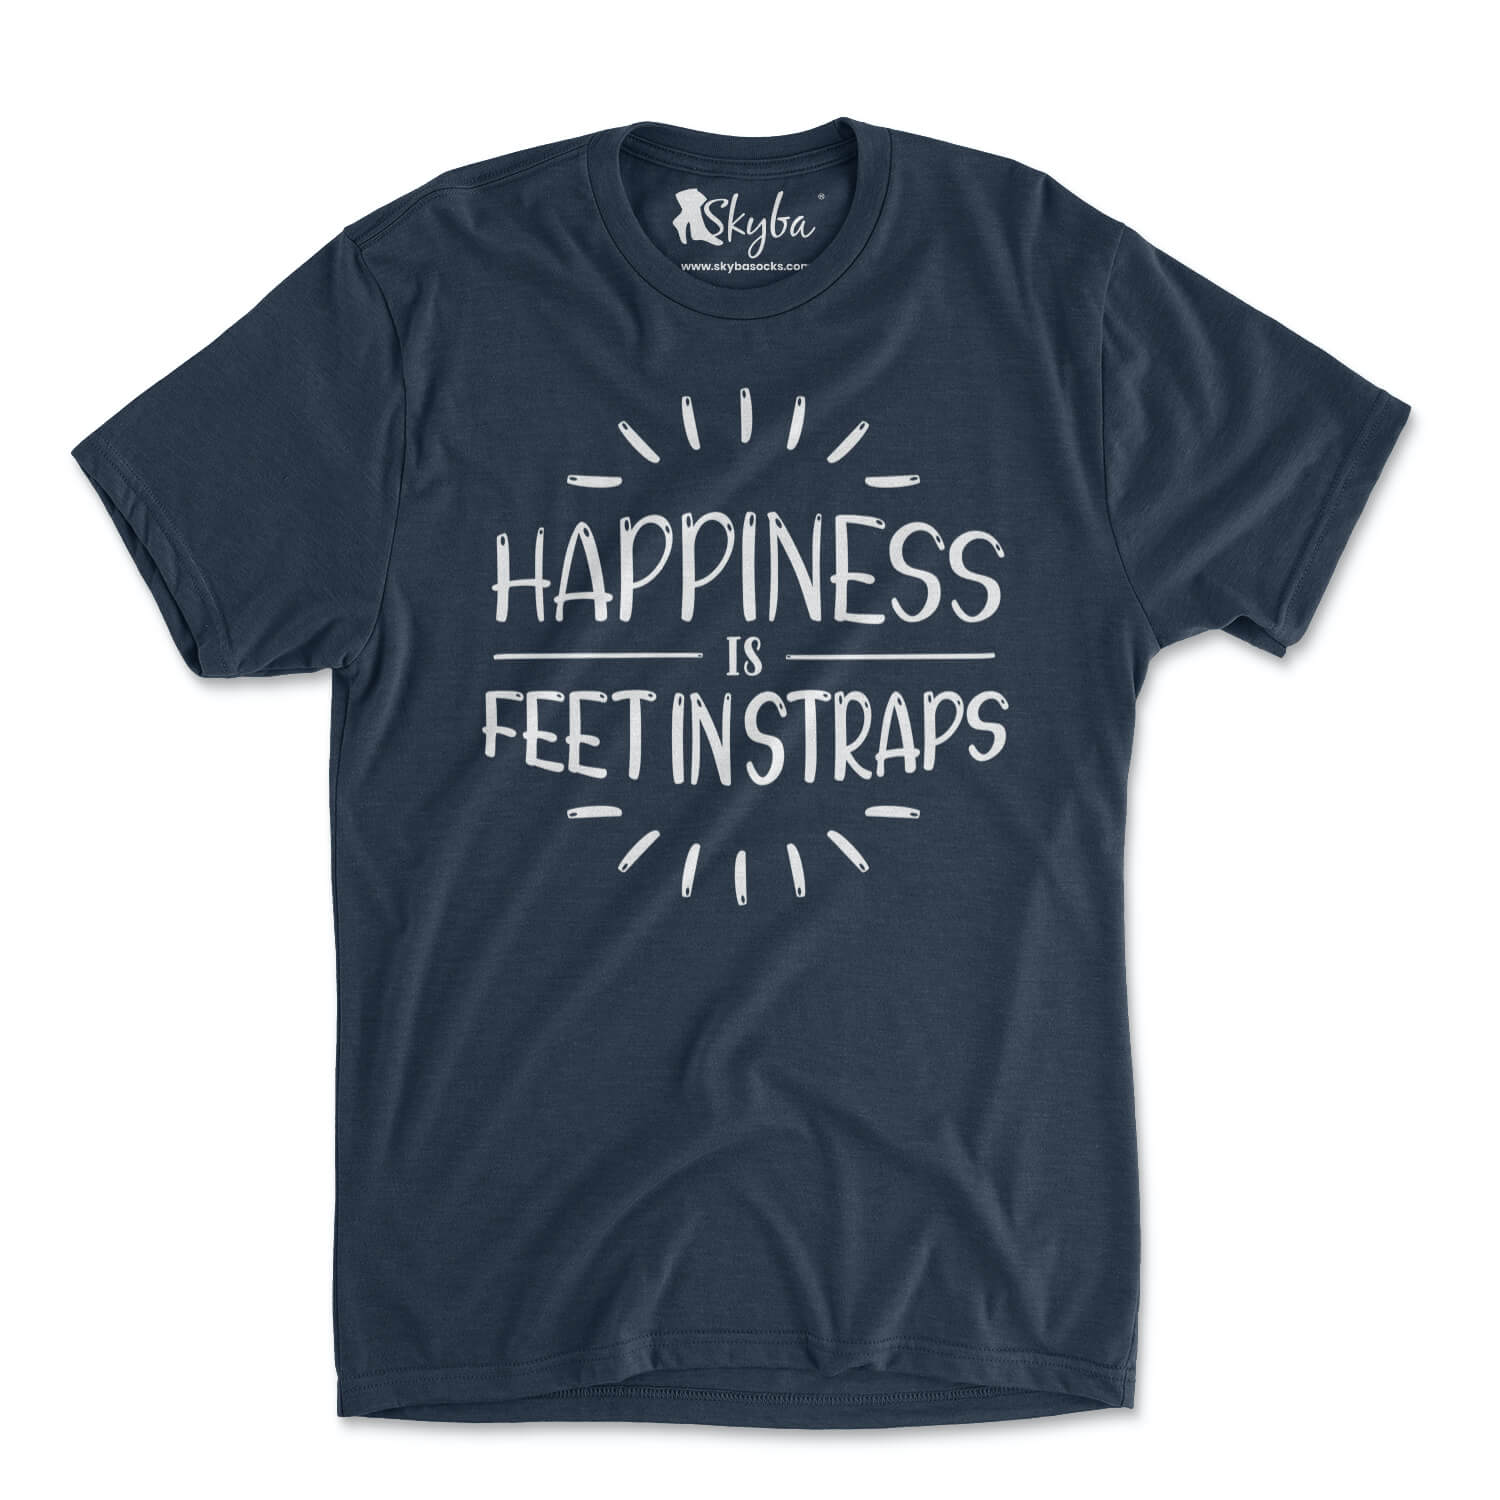 Happiness is Feet in Straps - Tri Blend Tee Skyba Tri-Blend Tee